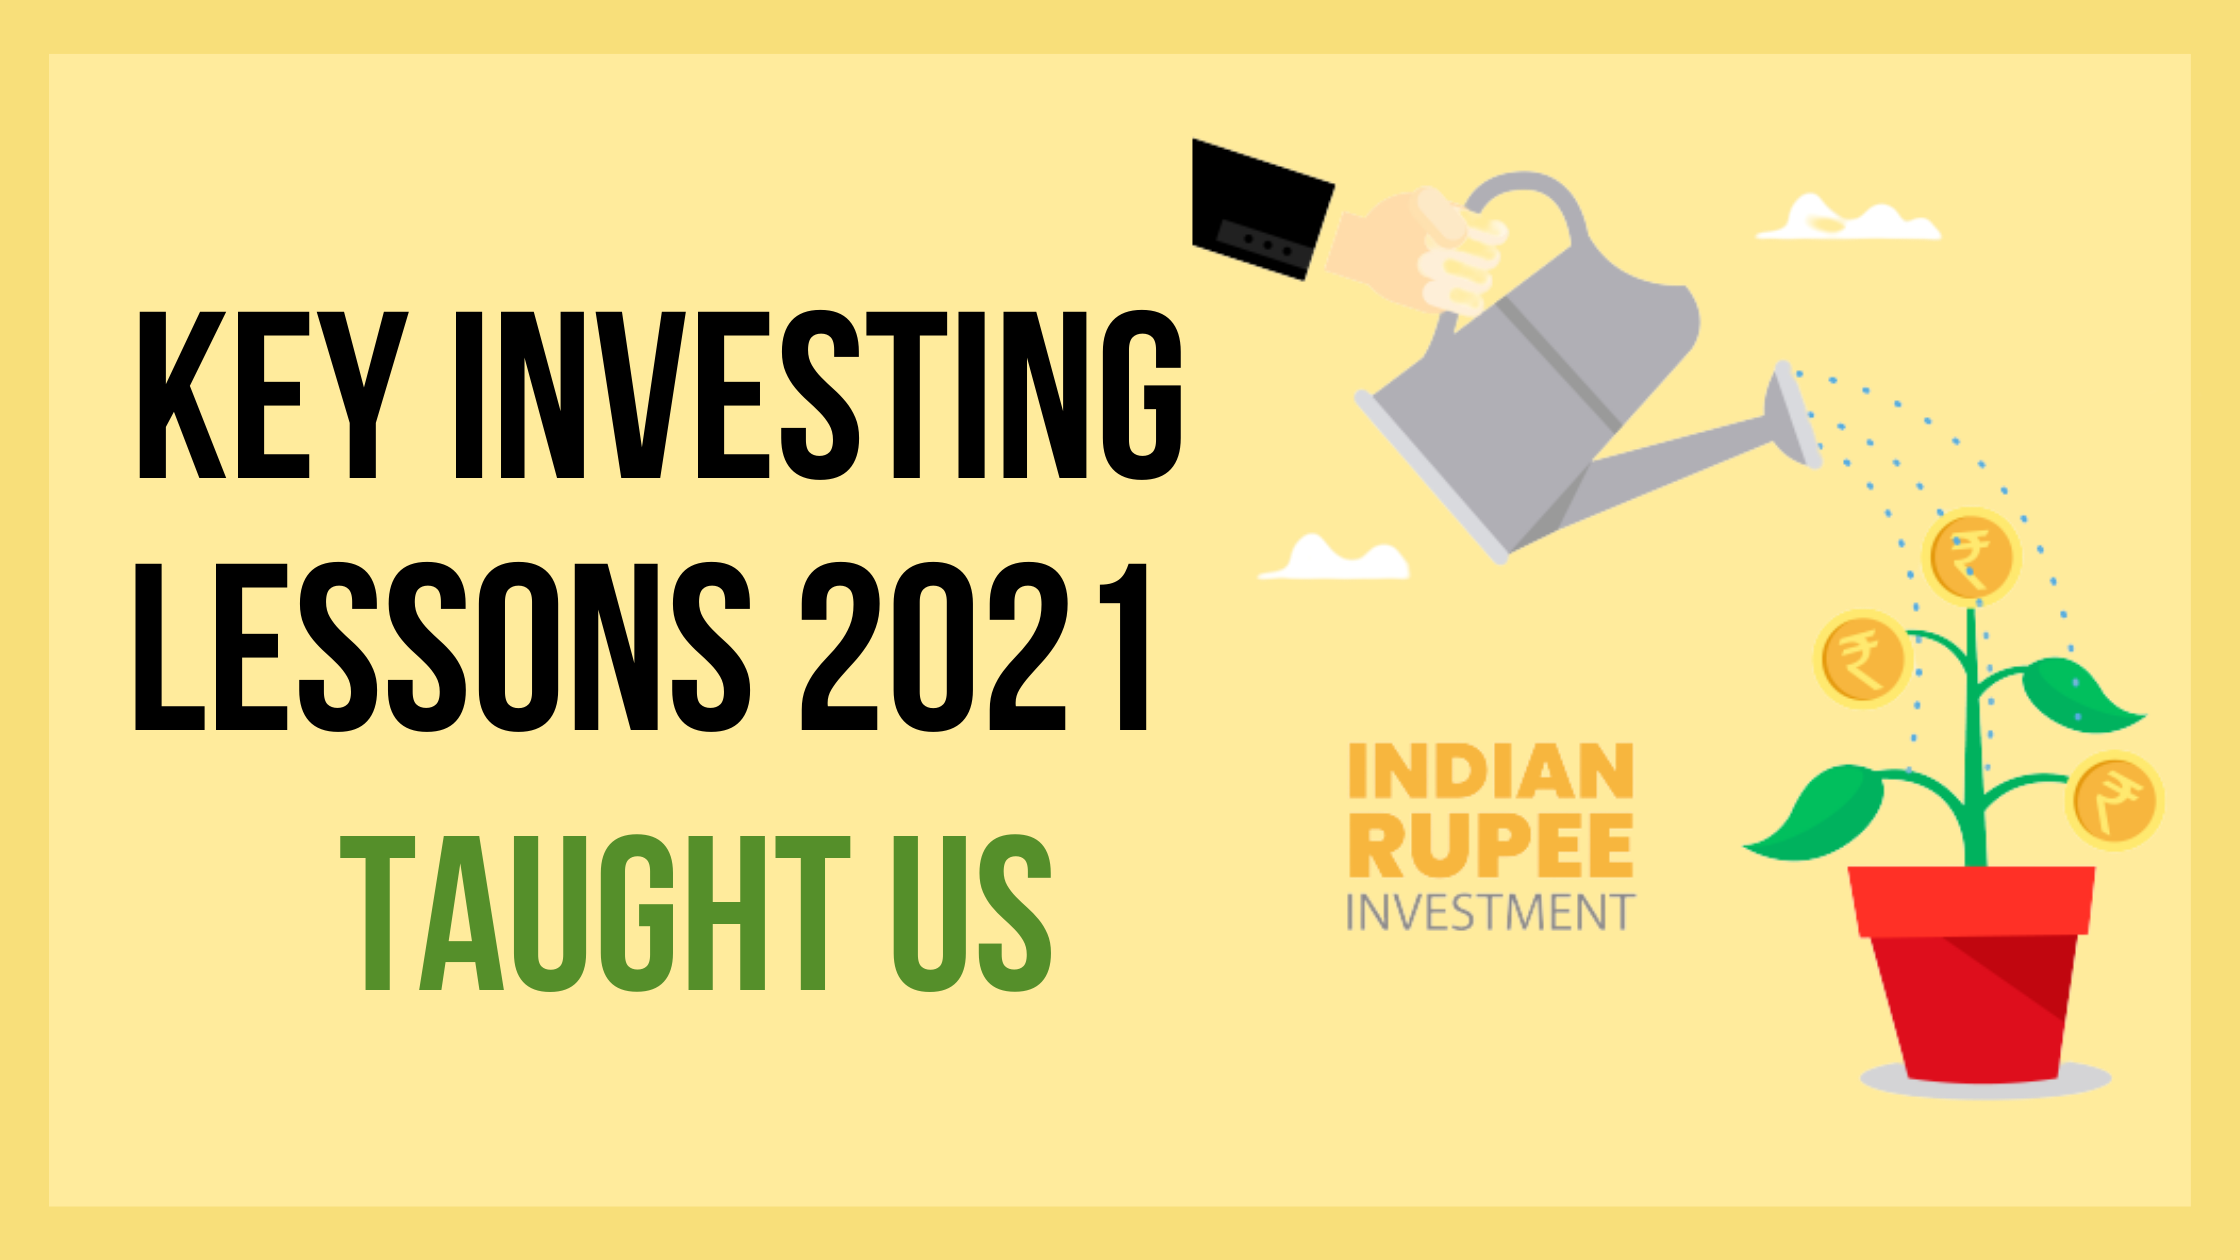 Key Investing Lessons 2021 Taught Us